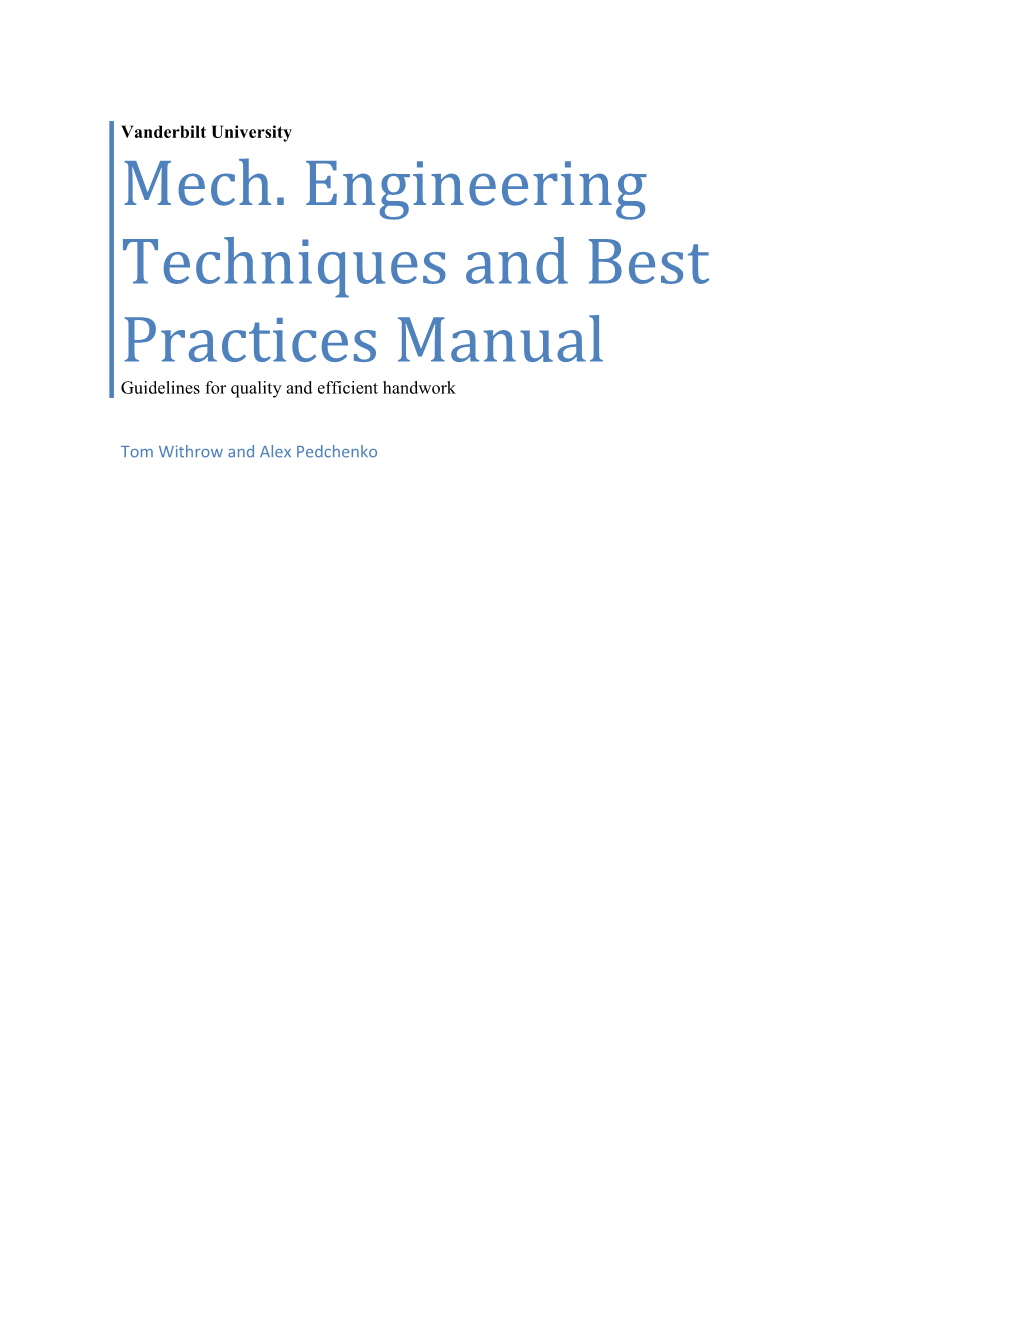 Mech. Engineering Techniques and Best Practices Manual